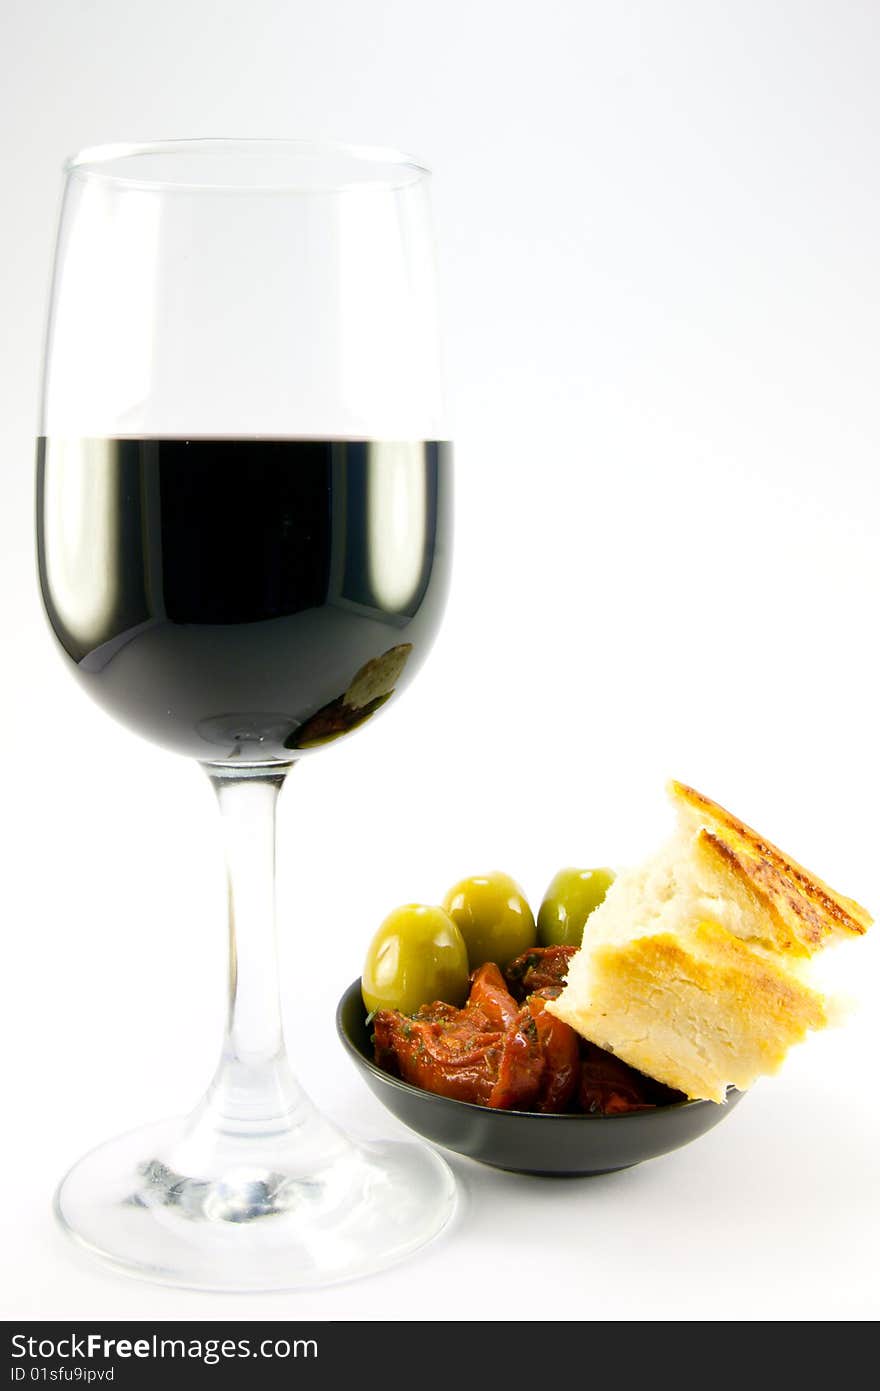 Pile of red sun dried tomatoes with three green olives and crusty bread in a small black dish with a glass of red wine on a plain background. Pile of red sun dried tomatoes with three green olives and crusty bread in a small black dish with a glass of red wine on a plain background